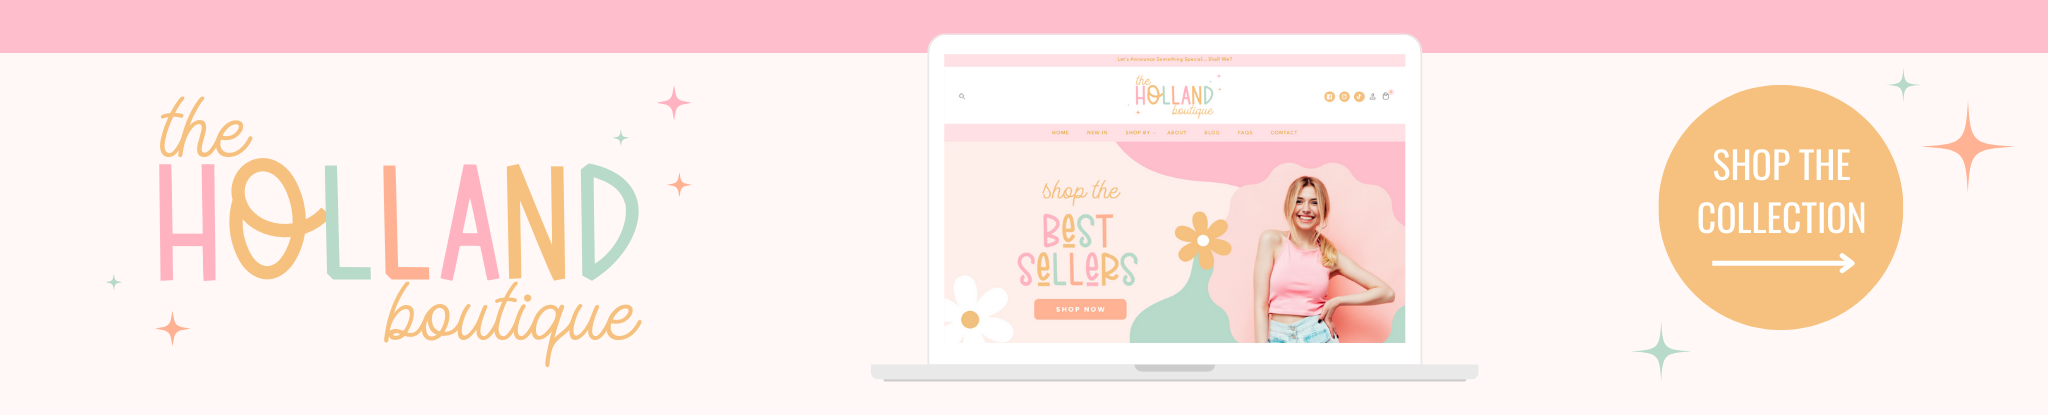 Boutique Website Templates for Shopify and ecommerce shops.